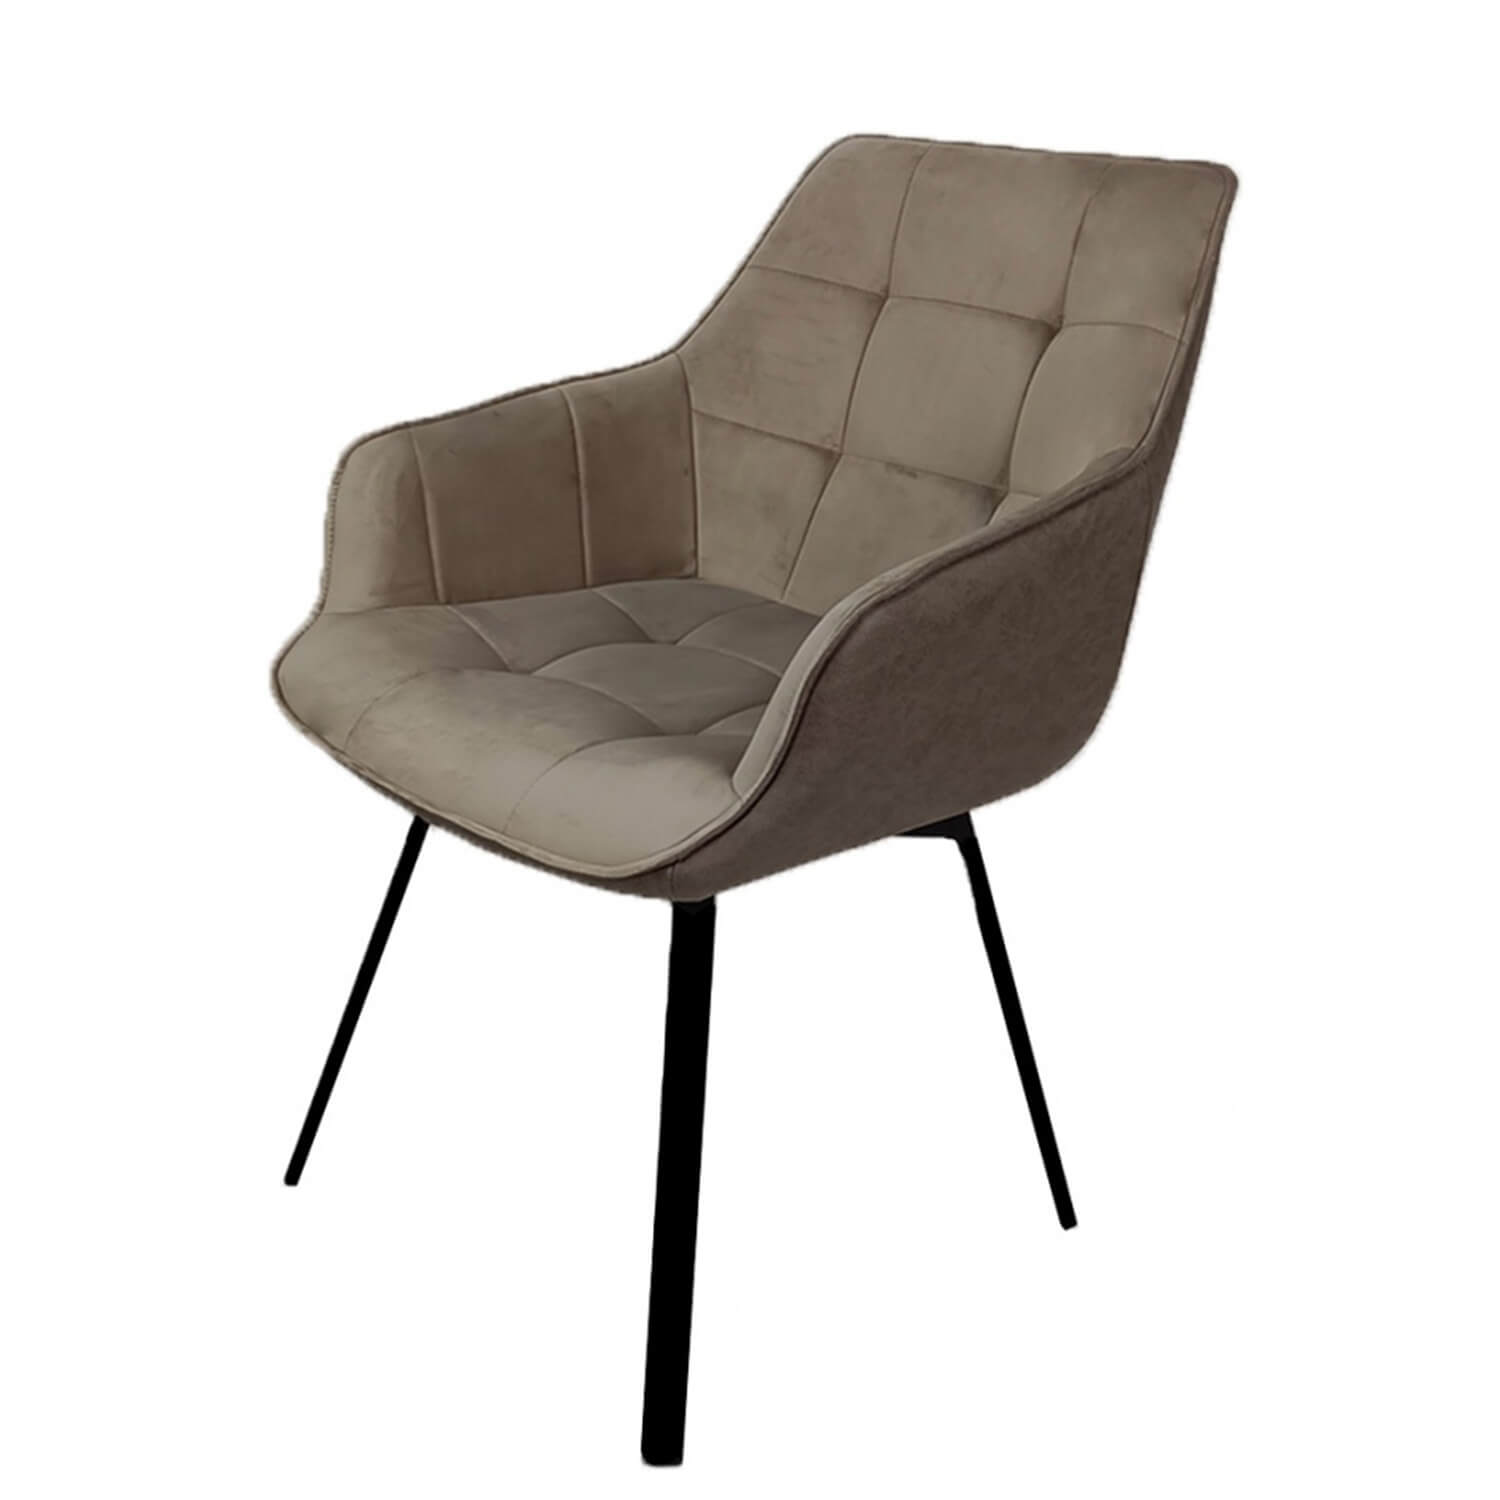 Arco dining chair